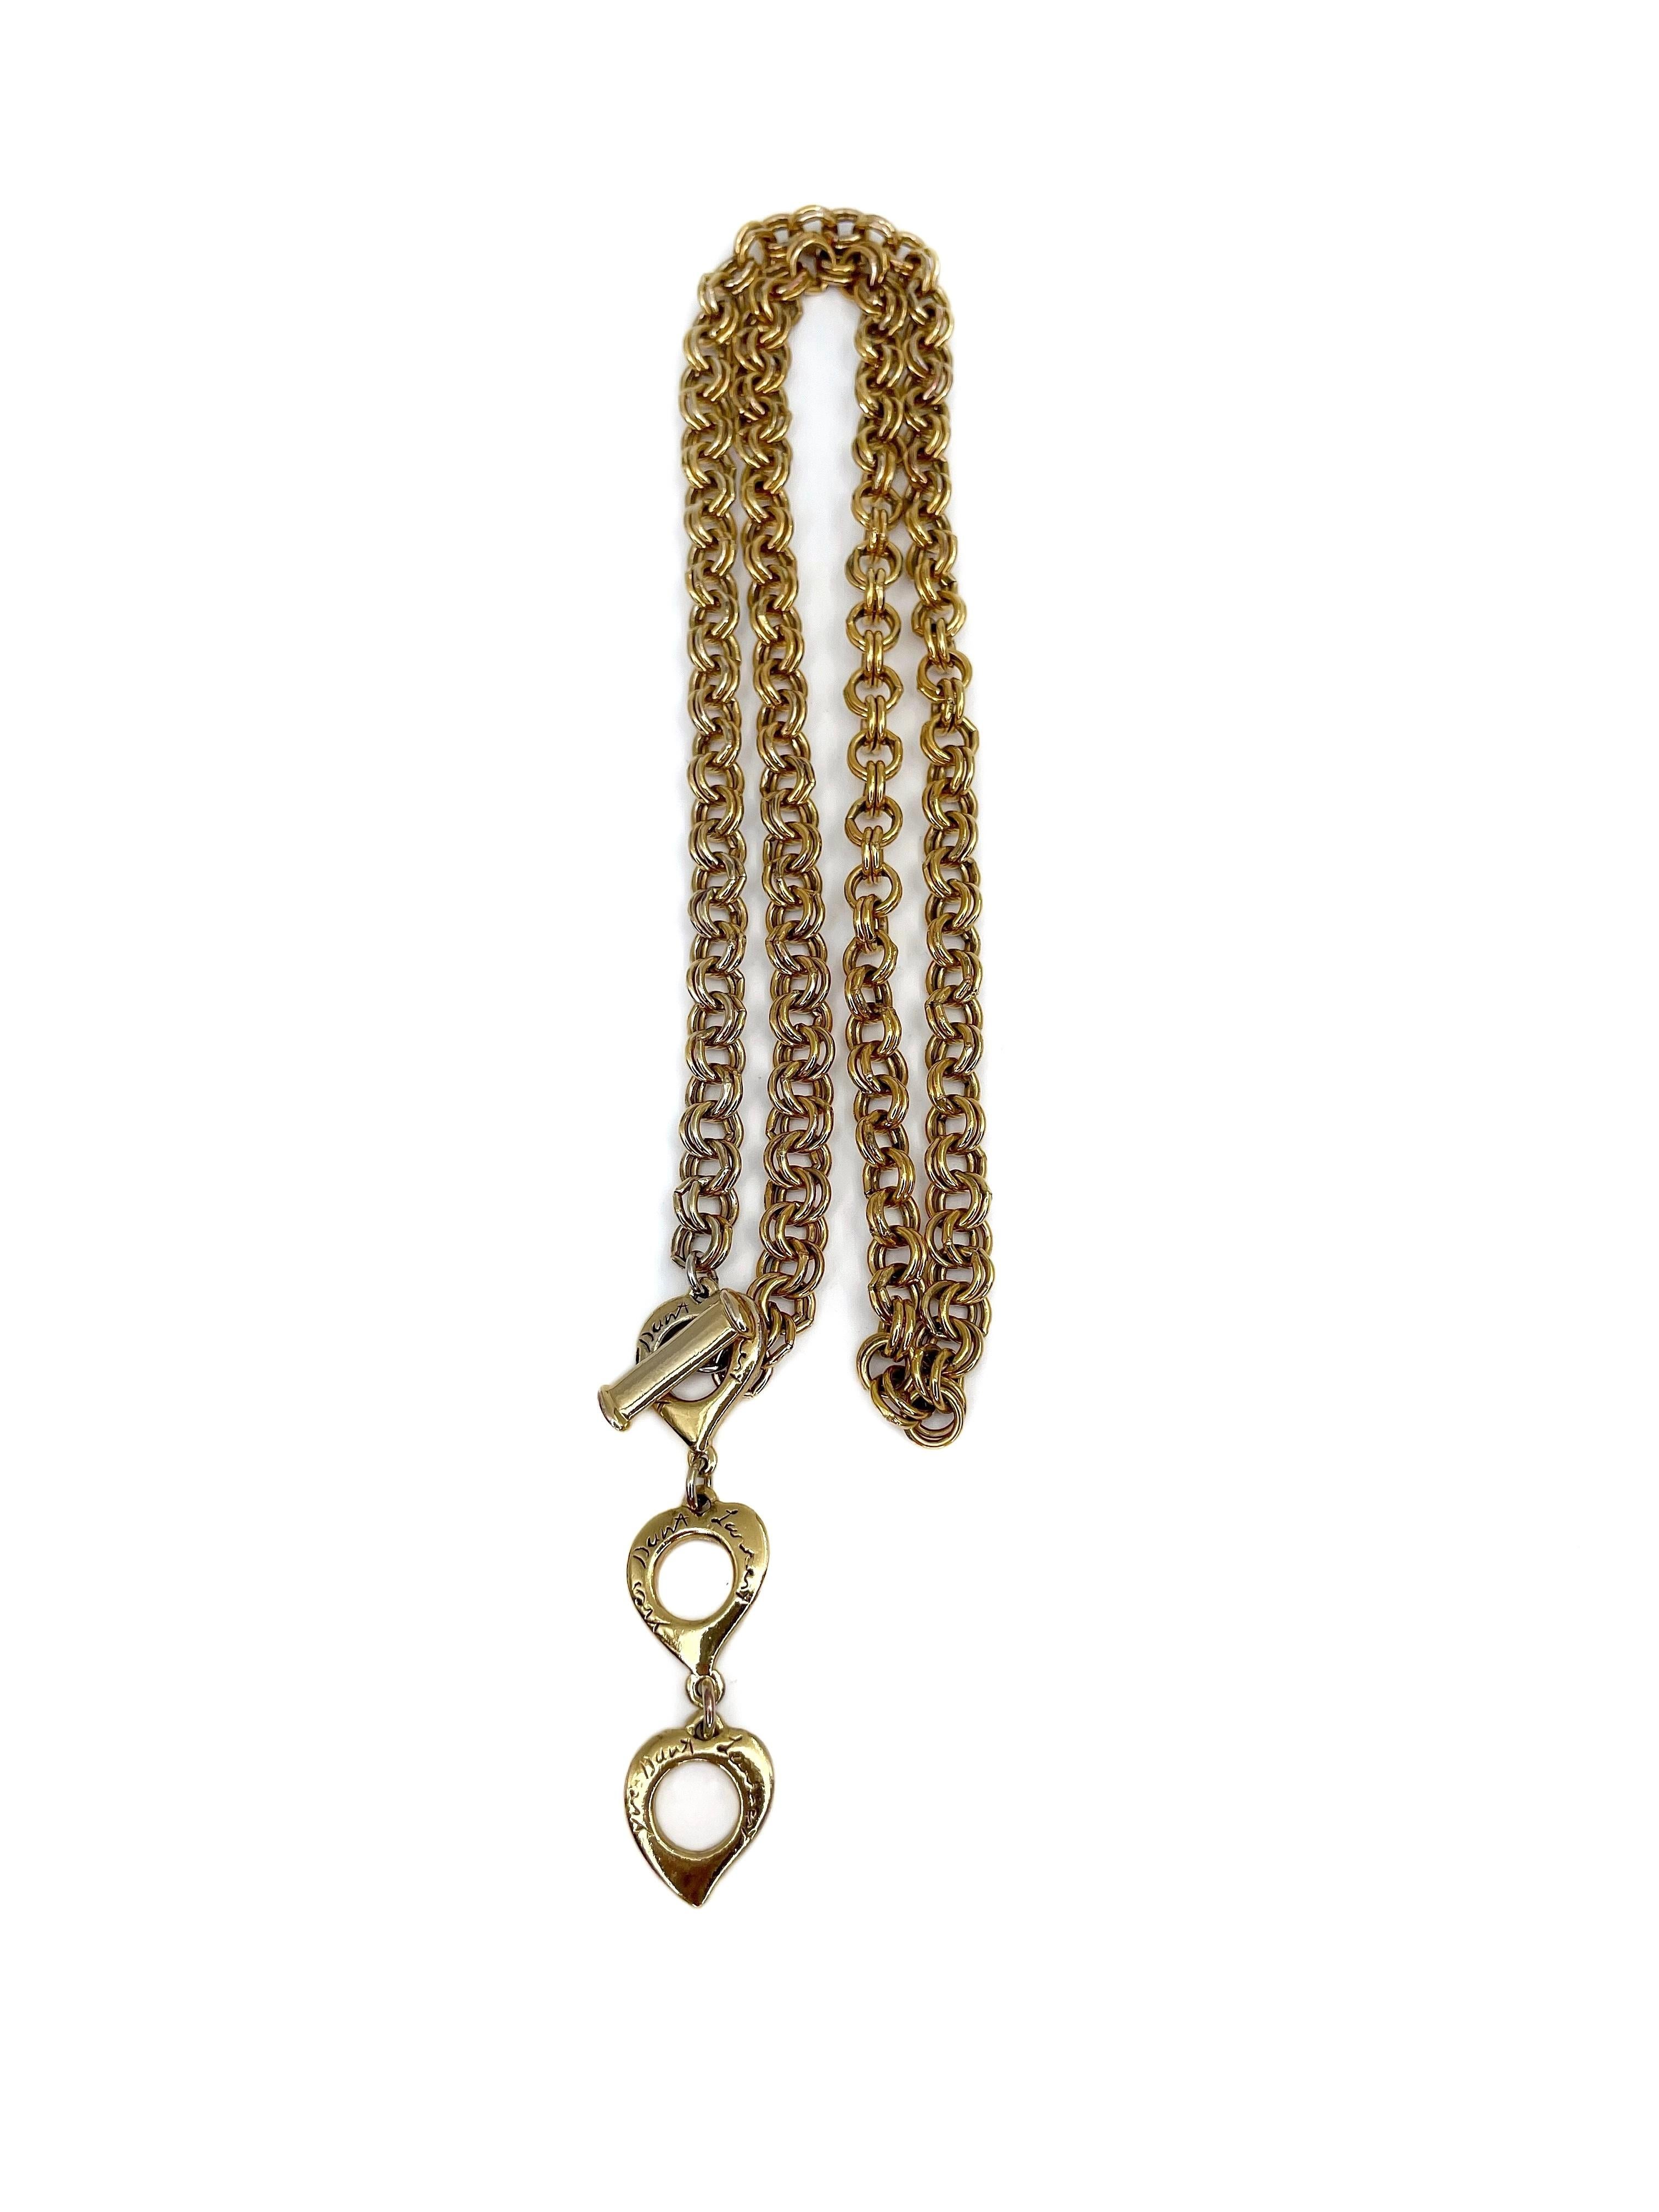 This is a vintage chain necklace designed by Robert Goossens for YSL in 1980’s. It is gold plated. 

The piece features three engraved hearts to adjust to the chosen length. The backs of these details has minor abrasions that appeared while using